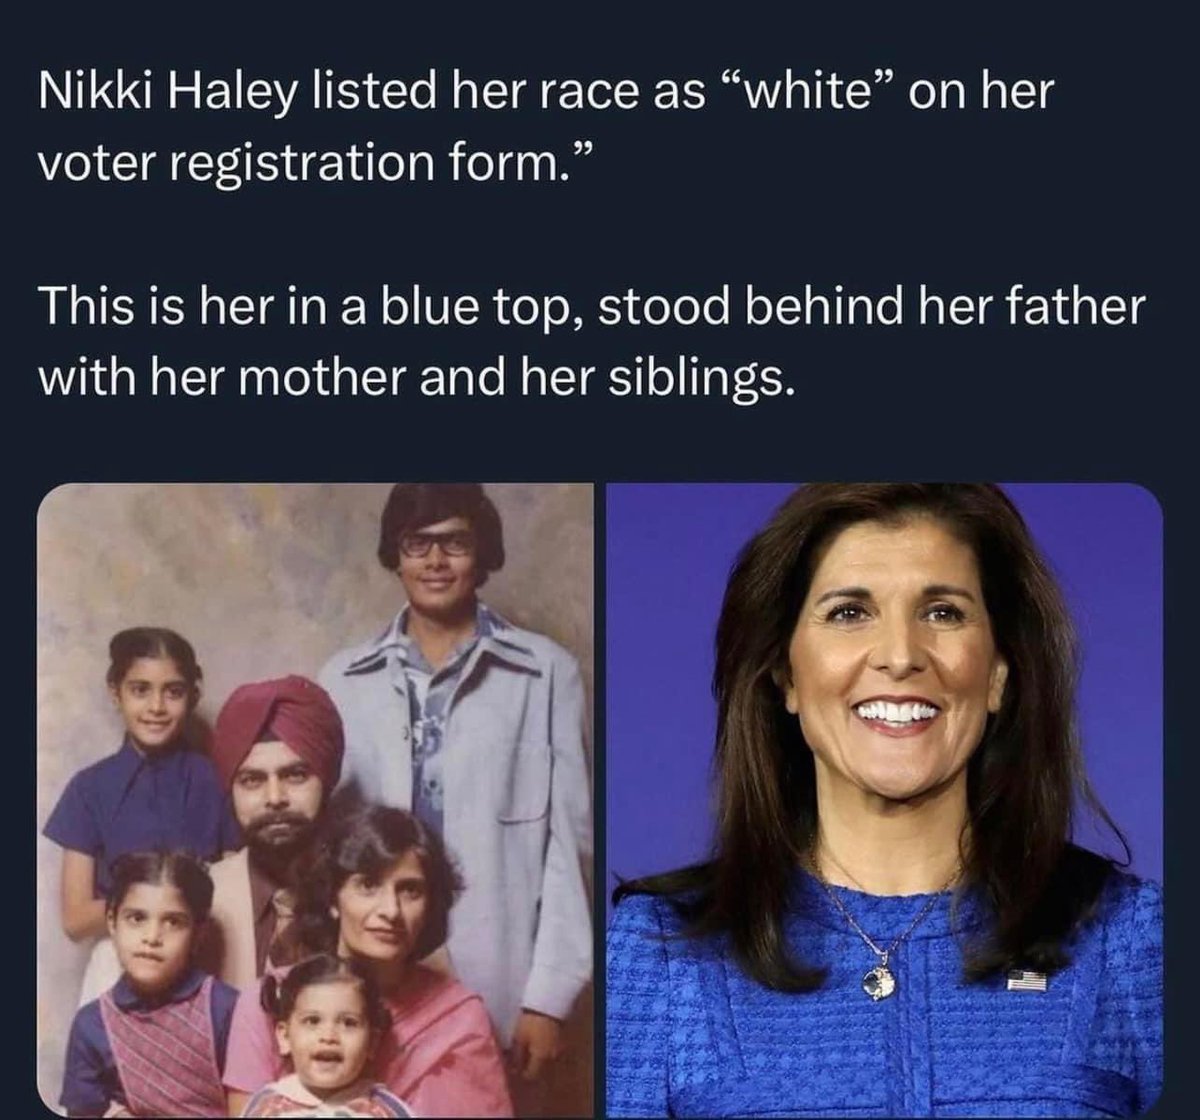 really?🧐@NikkiHaley  

No one will become a European just because their ancestors lived in our land and took refuge in our country. Race never changes, no matter how hard you try.